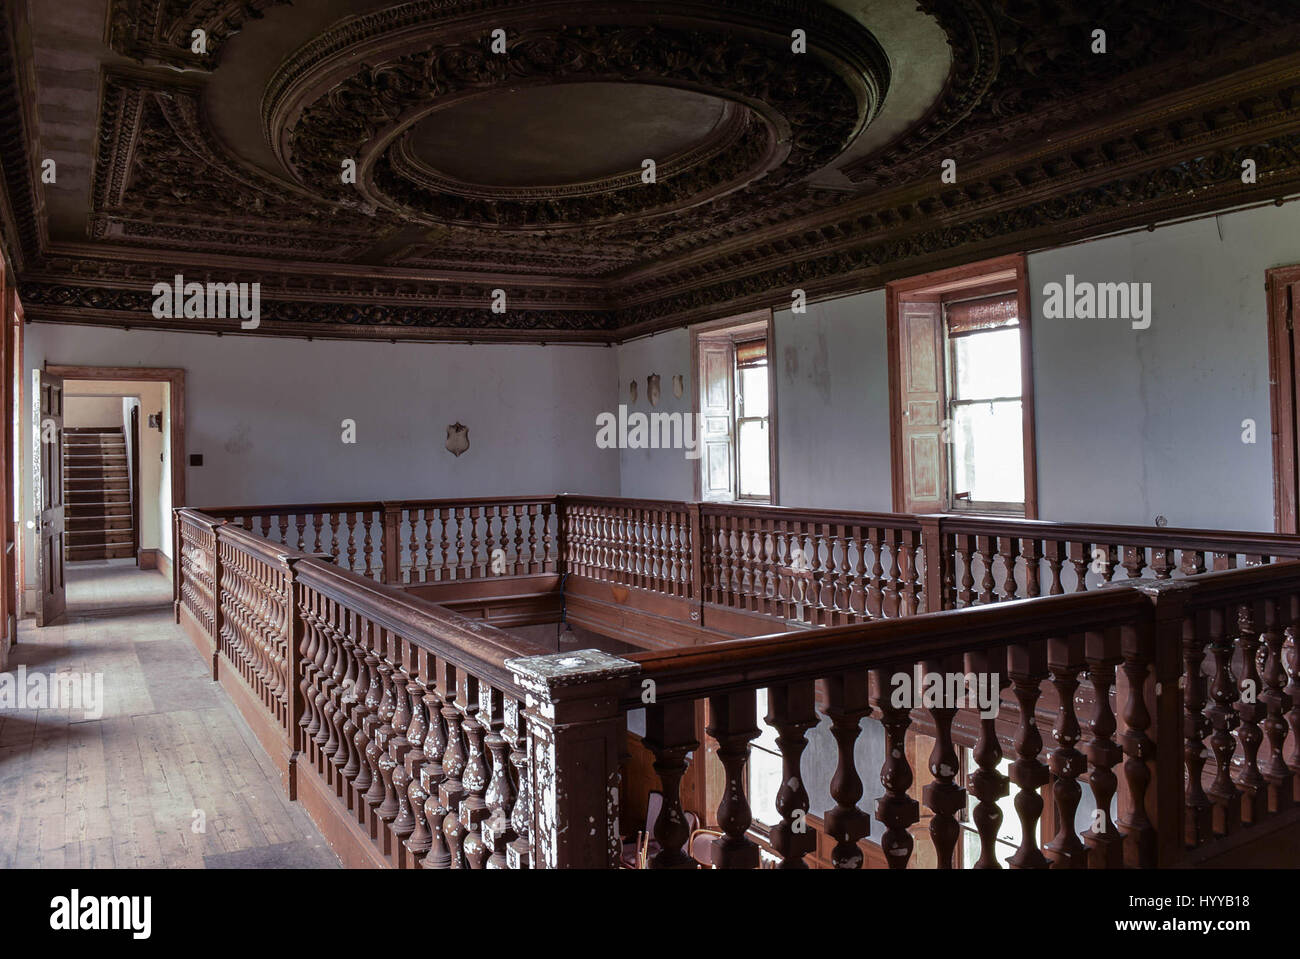 SCOTLAND, UNITED KINGDOM: STUNNING pictures offer a glimpse inside the decrepit Scottish mansion where Bonnie Prince Charlie once made his headquarters now on the open market for £1.25million despite efforts of a local trust to secure the historic building for the nation. The atmospheric images show the original four-poster bed that Prince Charles Edward Stuart slept in, and possibly sired his only daughter on, chipped banisters and a neglected snooker table with vintage scoreboard.  Other photos show a corridor of what would have been servants’ rooms and what looks like a utility room. The ho Stock Photo